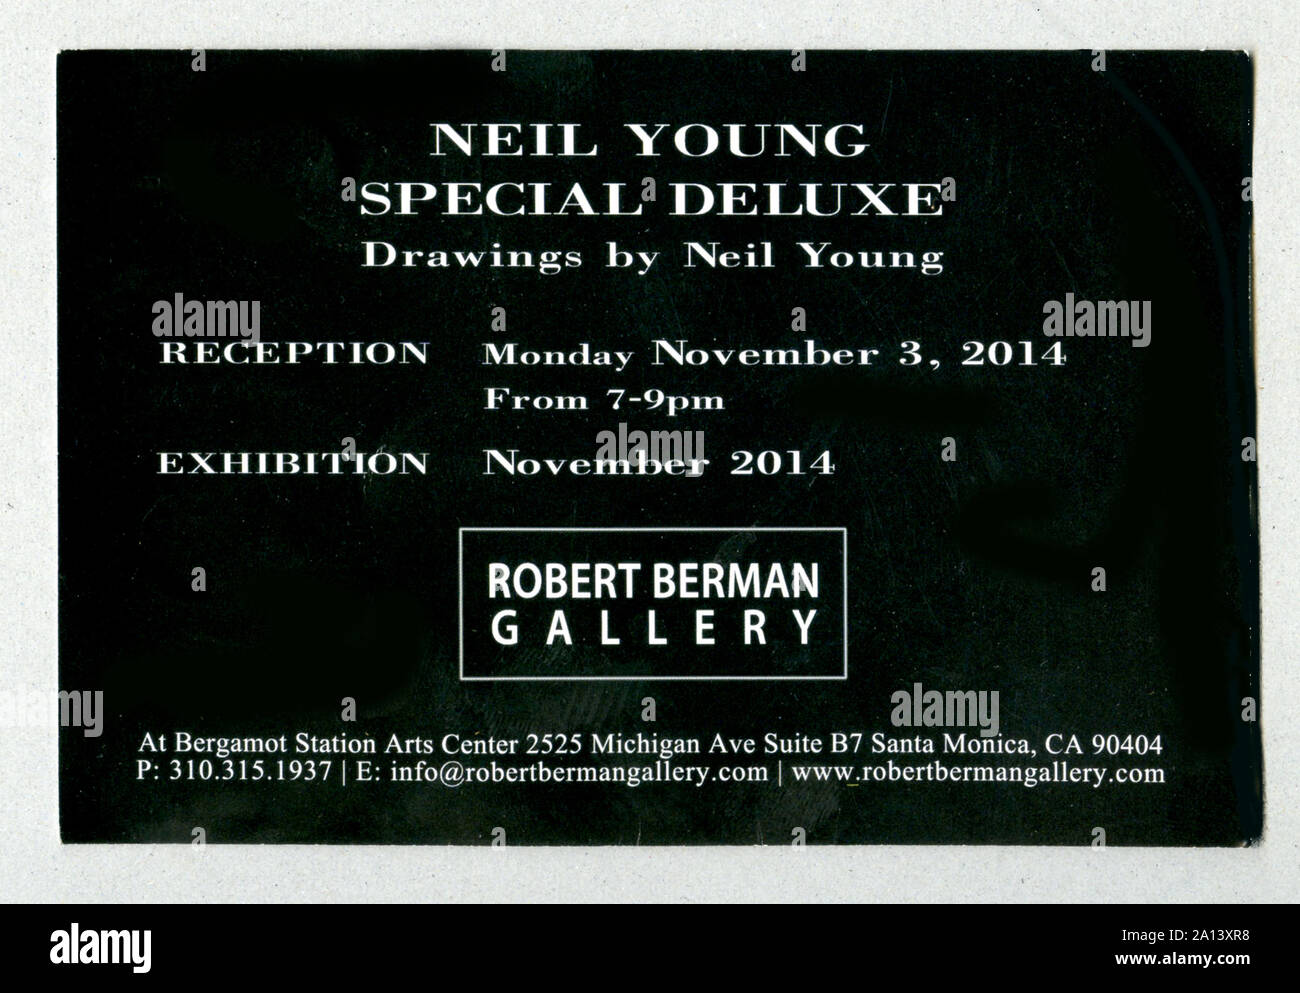 Gallery announcement of art exhibition by rock star Neil Young at the Robert Berman Gallery in Santa Monica, CA,2014 Stock Photo